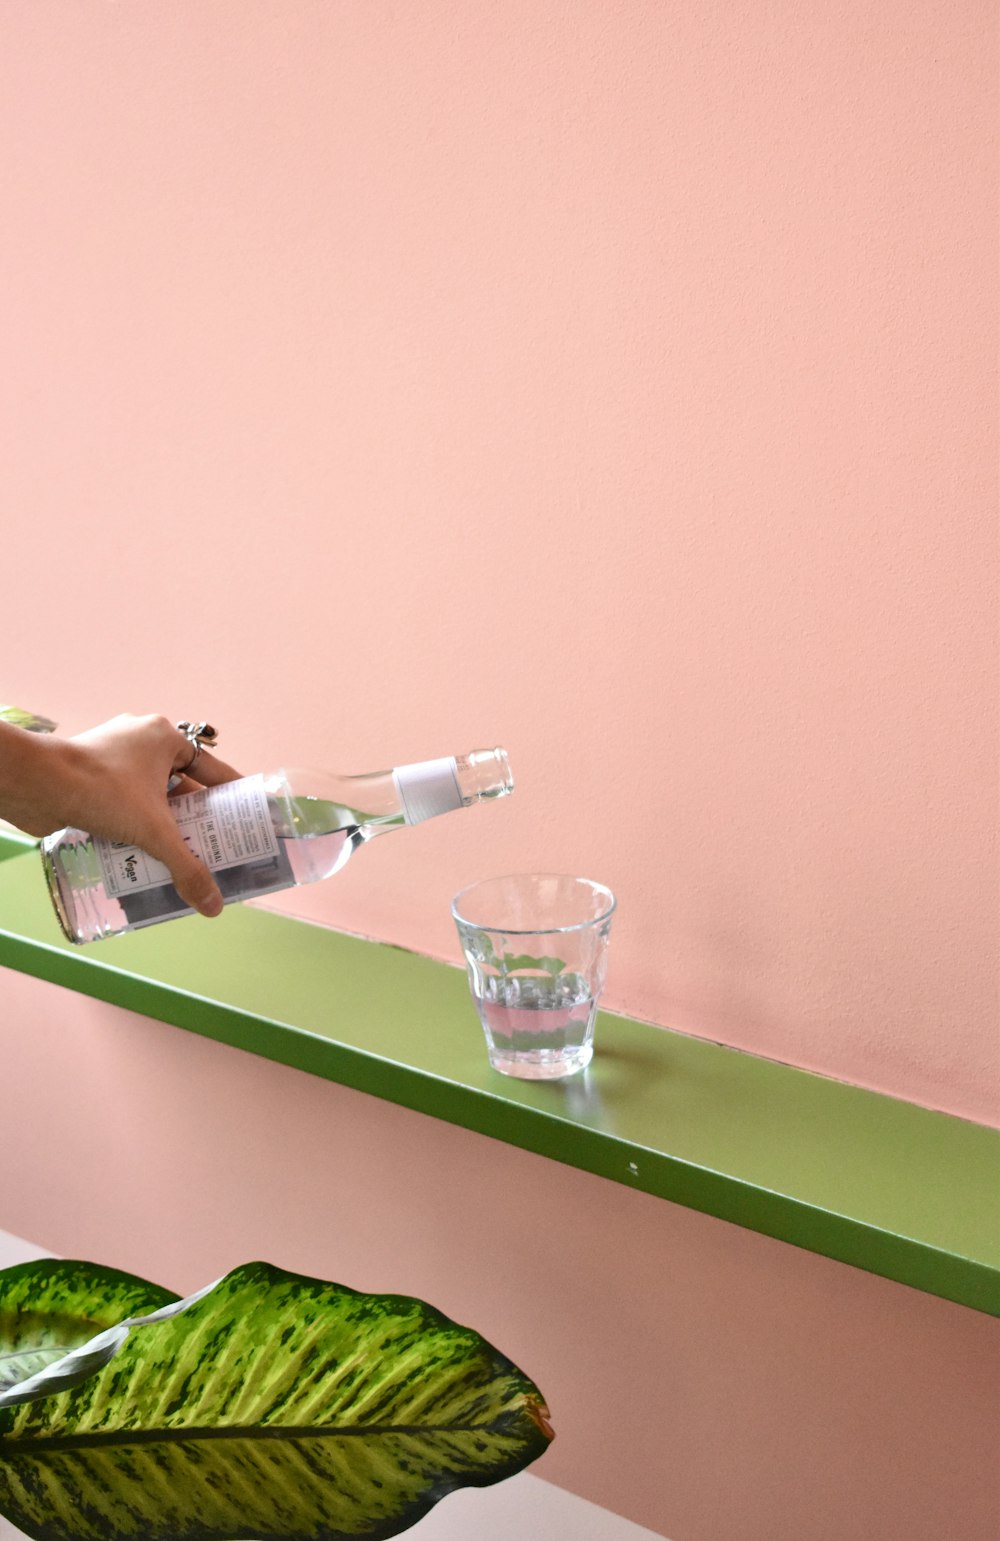 a person pouring water into a glass on a shelf